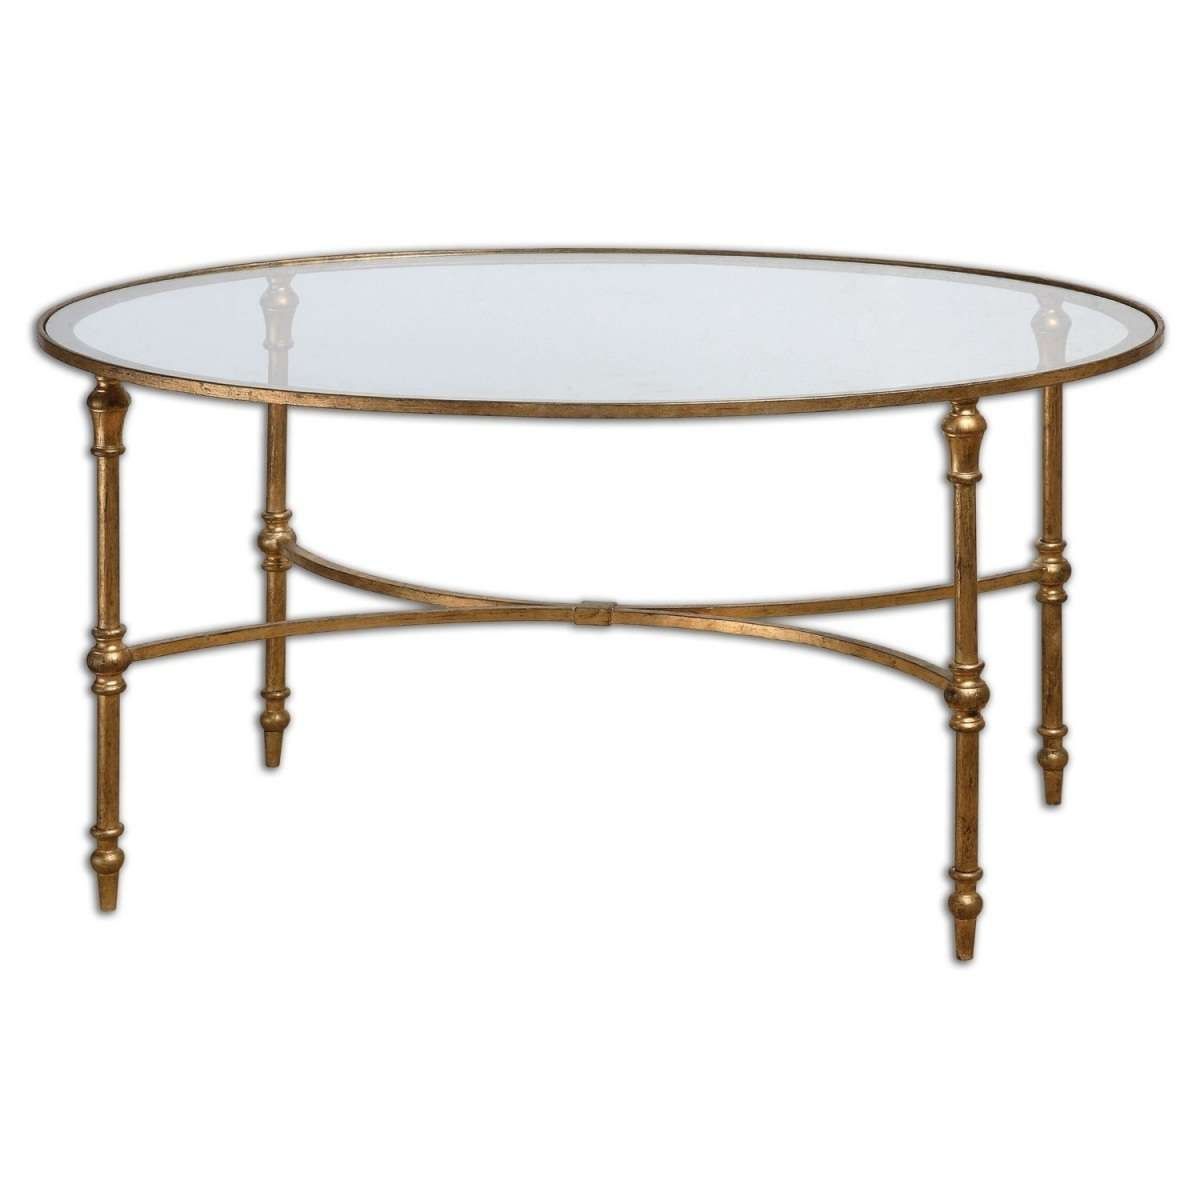 Coffee Tables : Glass Top Coffee Table With Metal Base Round Gold Intended For Most Popular Metal Coffee Tables With Glass Top (View 6 of 20)